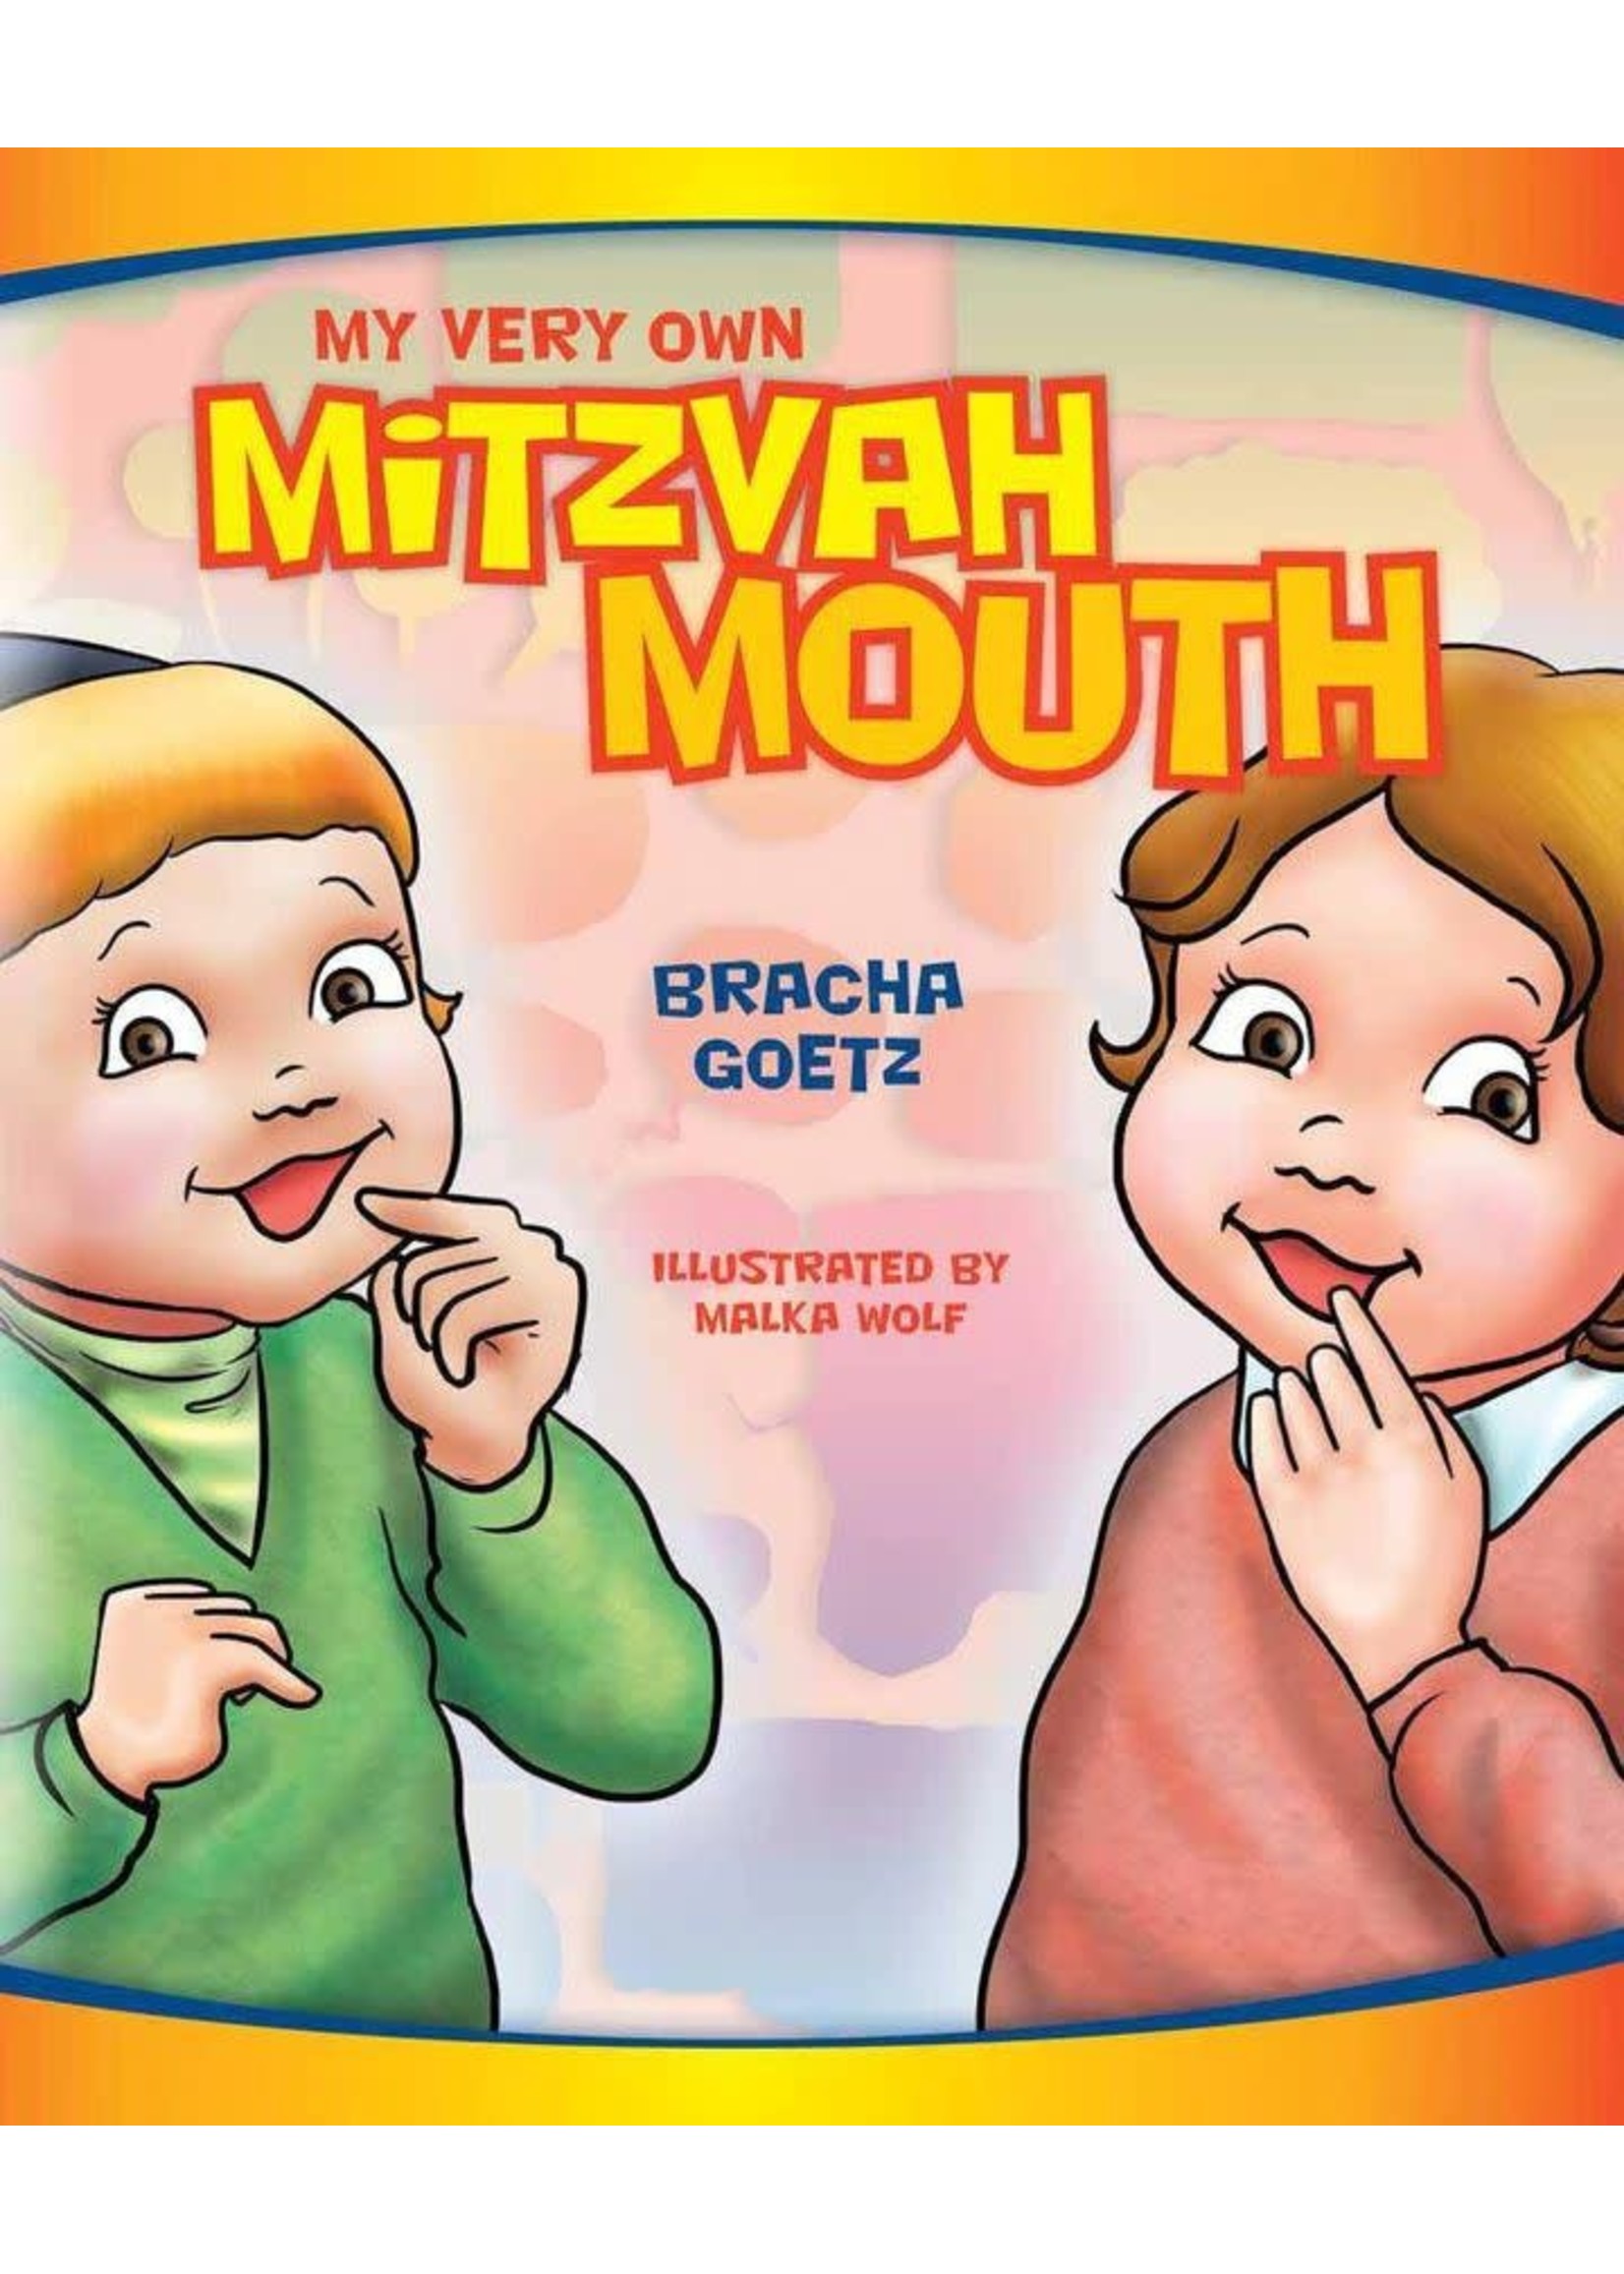 MY VERY OWN MITZVAH MOUTH